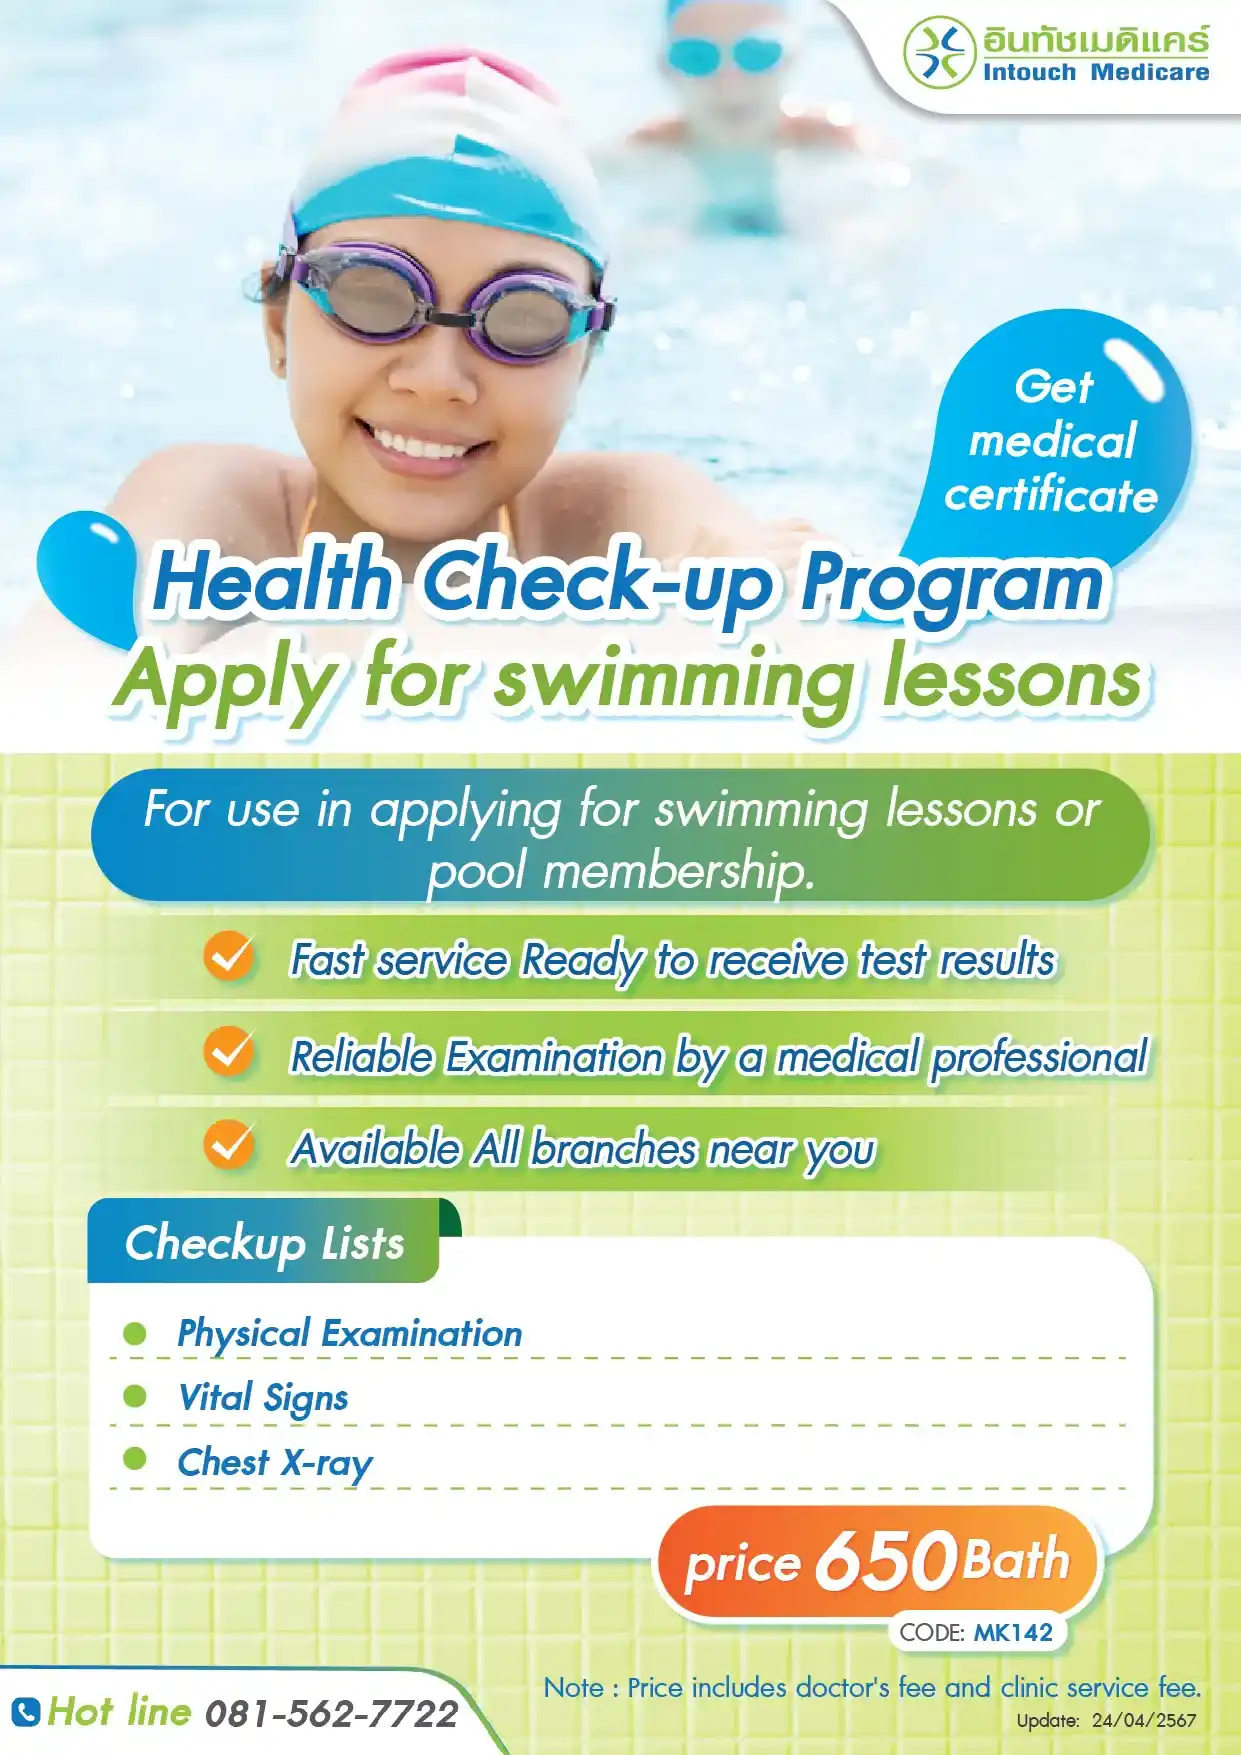 Health Check-up Program Apply for swimming lessons with a medical certificate